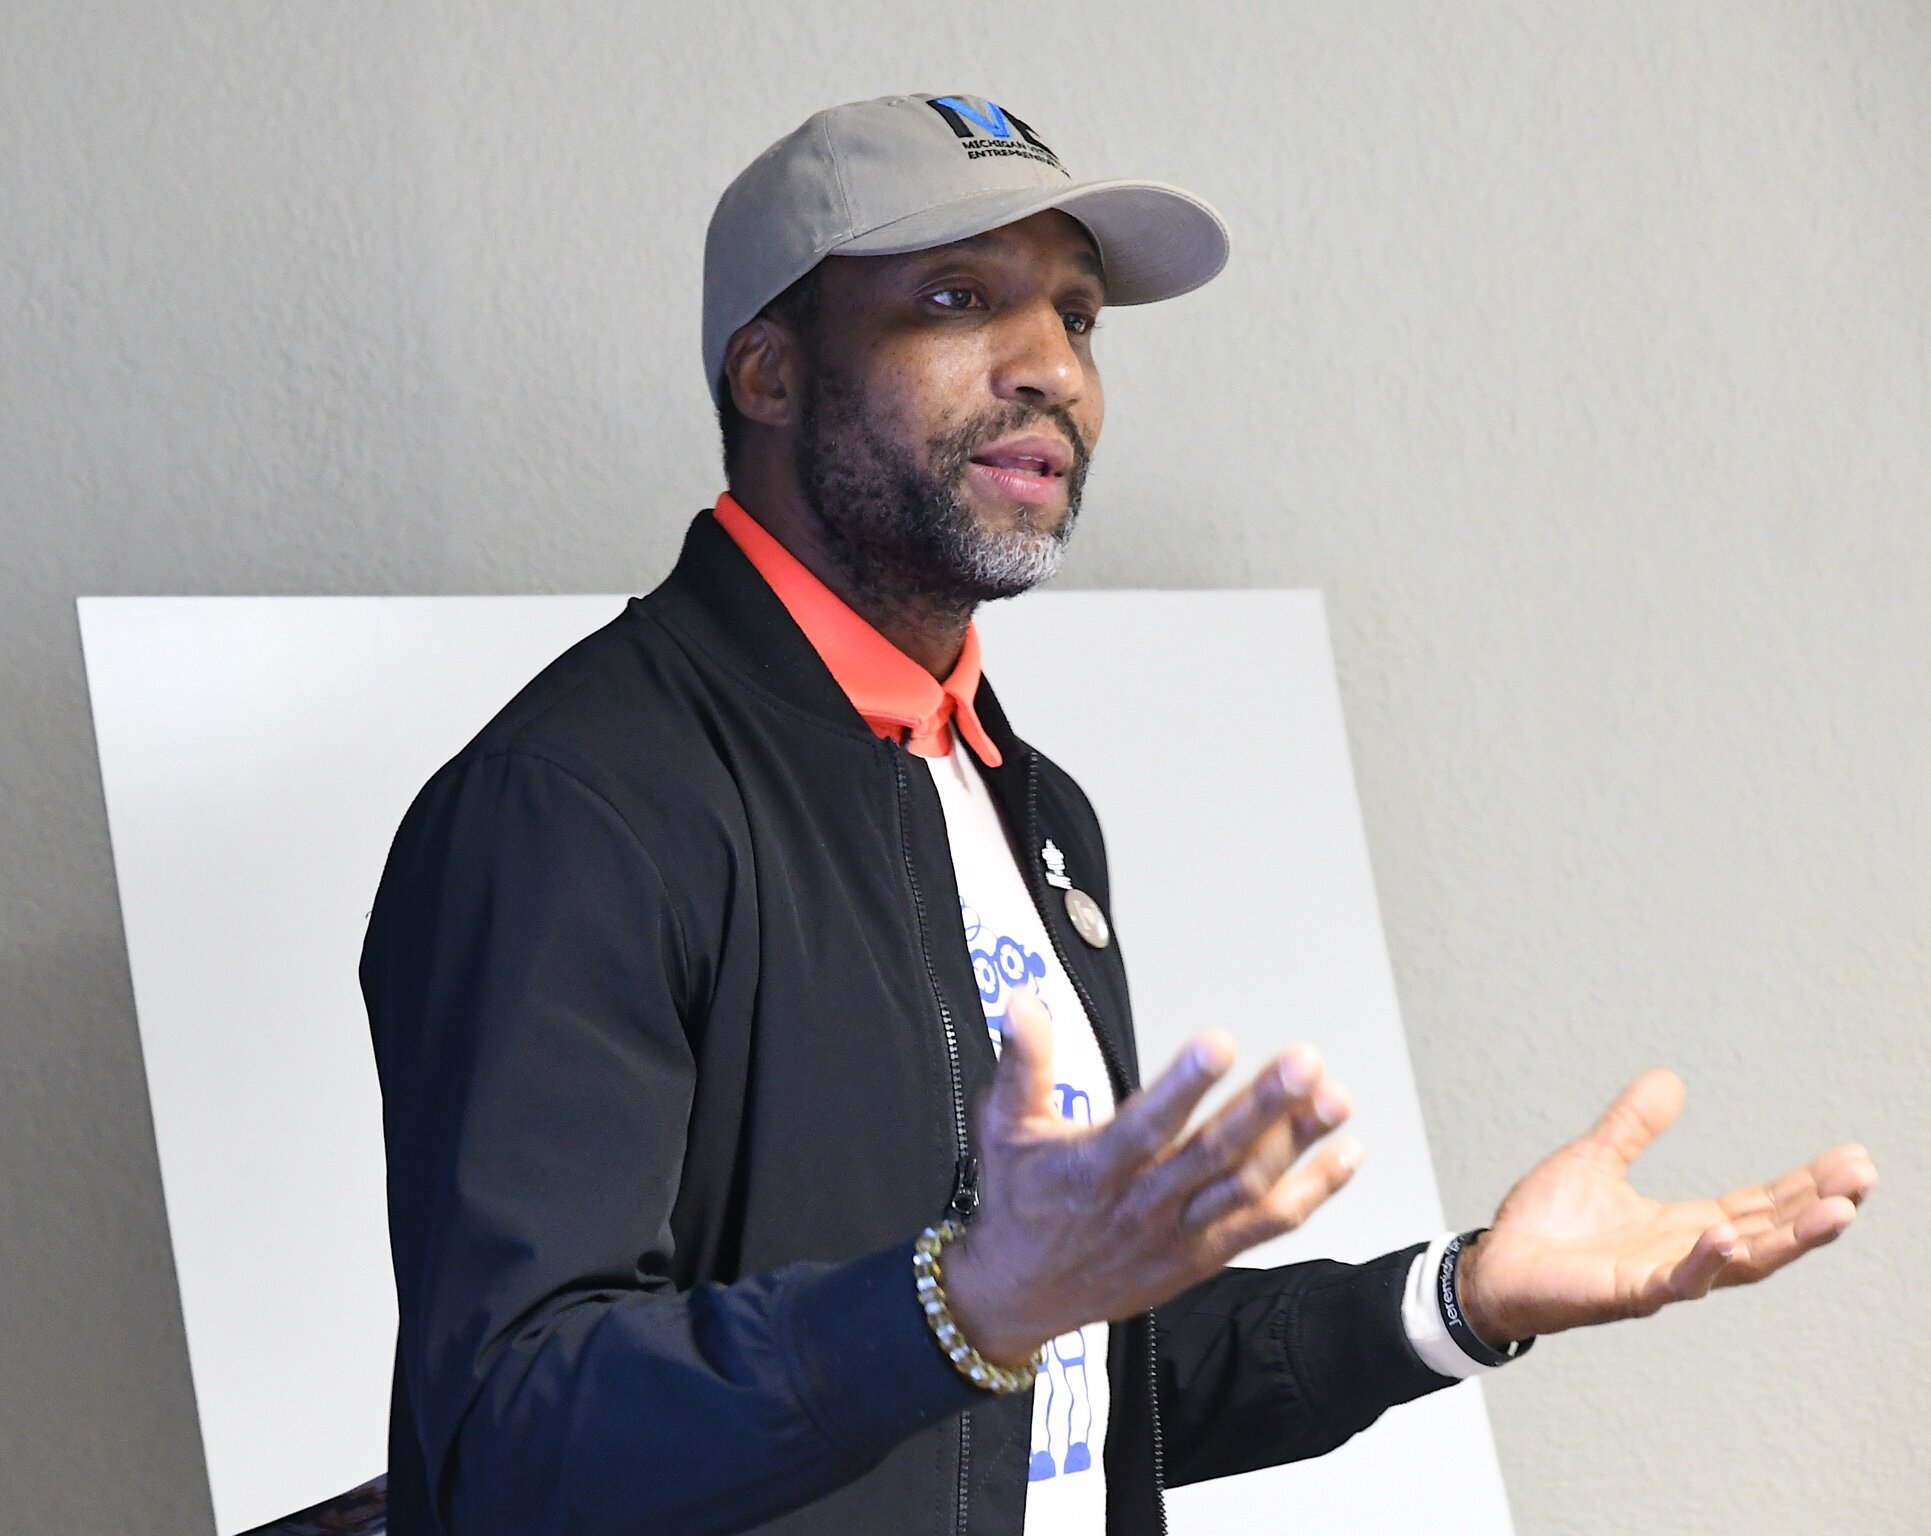 Michael Hyacinthe, a U.S. Navy veteran and entrepreneur makes a presentation presenters during the opening session of the Michigan Veteran Entrepreneur Lab session in Battle Creek.